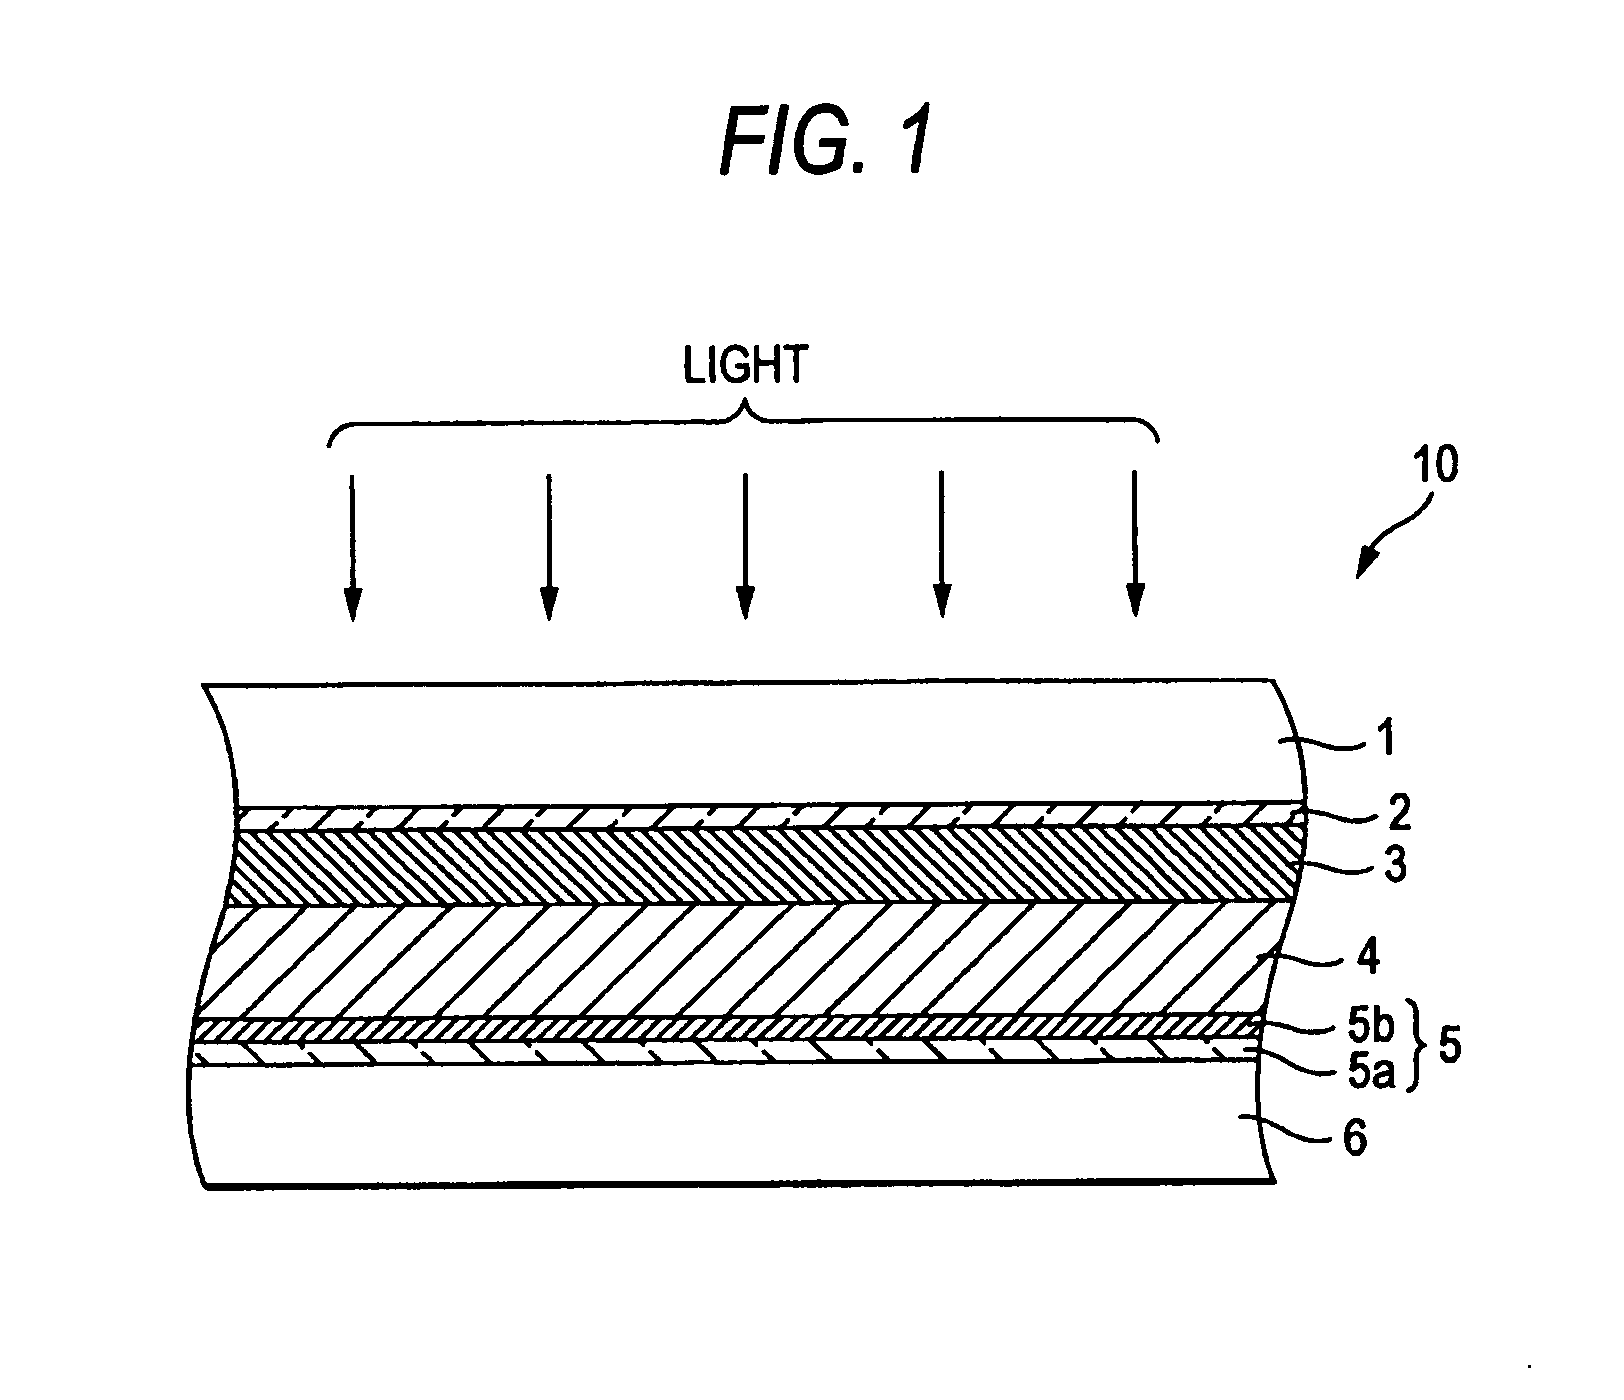 Photoelectric conversion apparatus and gelling agent